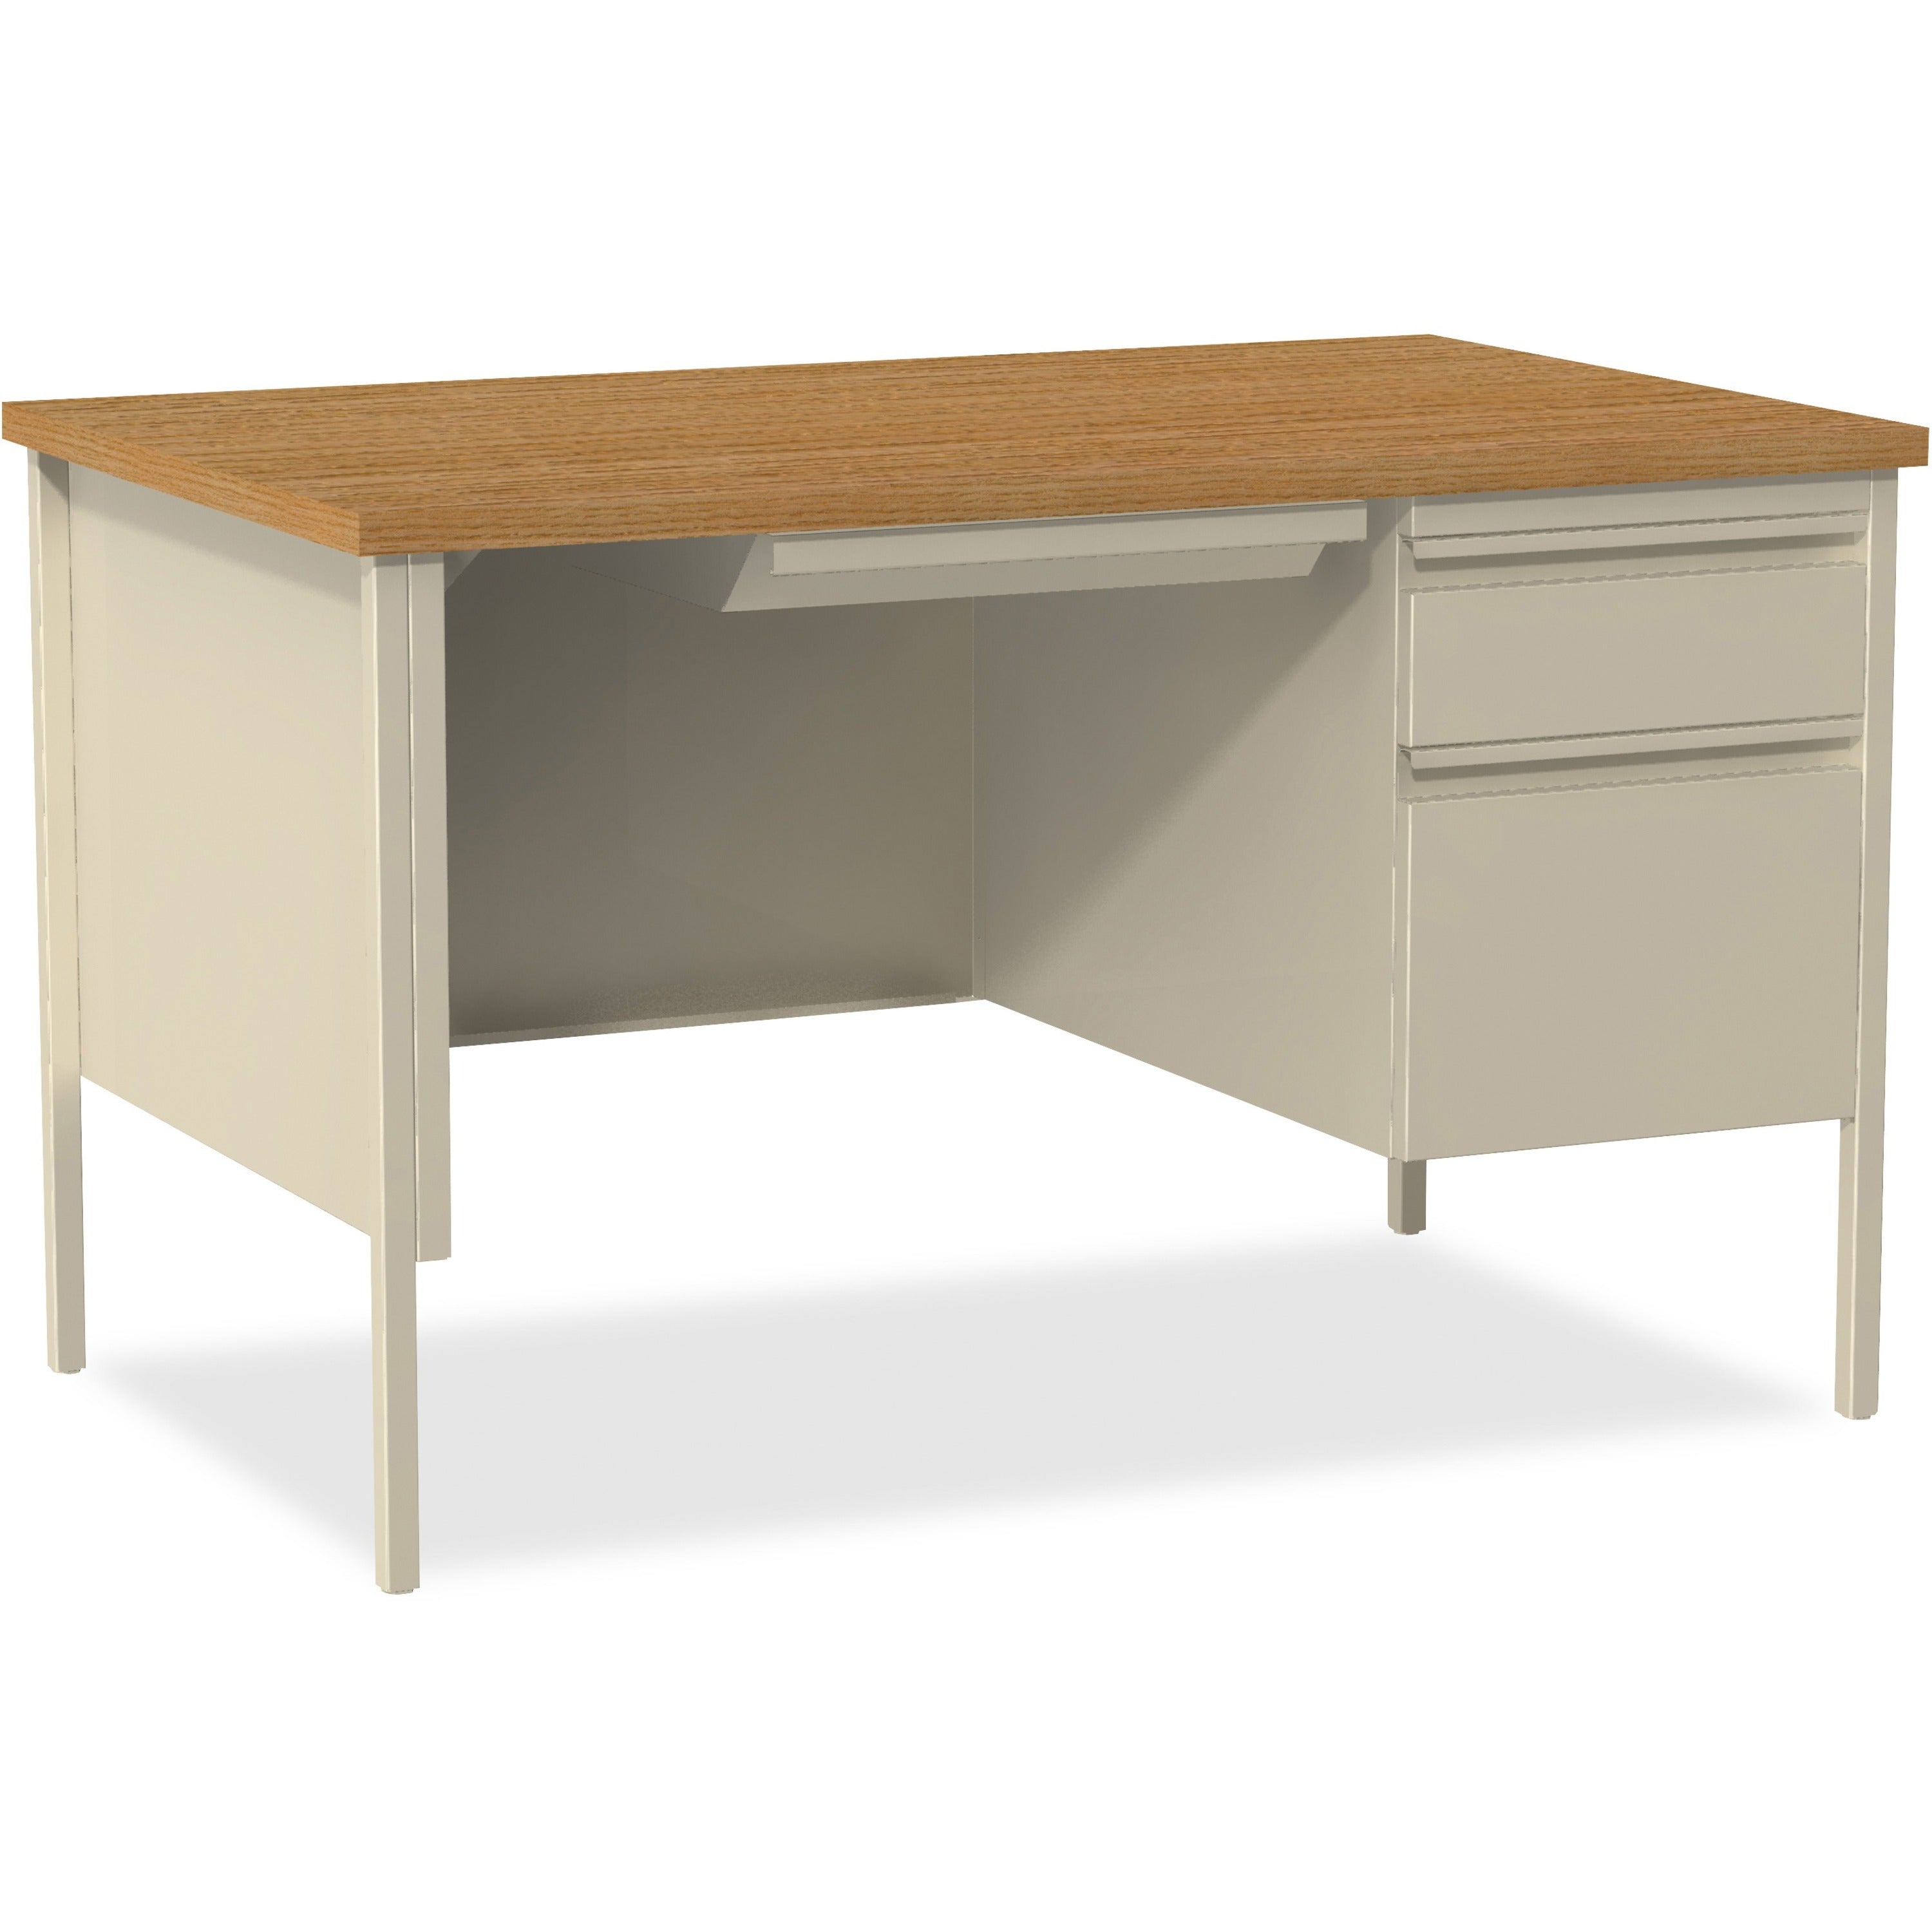 lorell-fortress-series-48-right-single-pedestal-desk-for-table-topoak-laminate-rectangle-top-30-table-top-length-x-48-table-top-width-x-113-table-top-thickness-2950-height-assembly-required-oak-putty-steel-1-each_llr66908 - 1